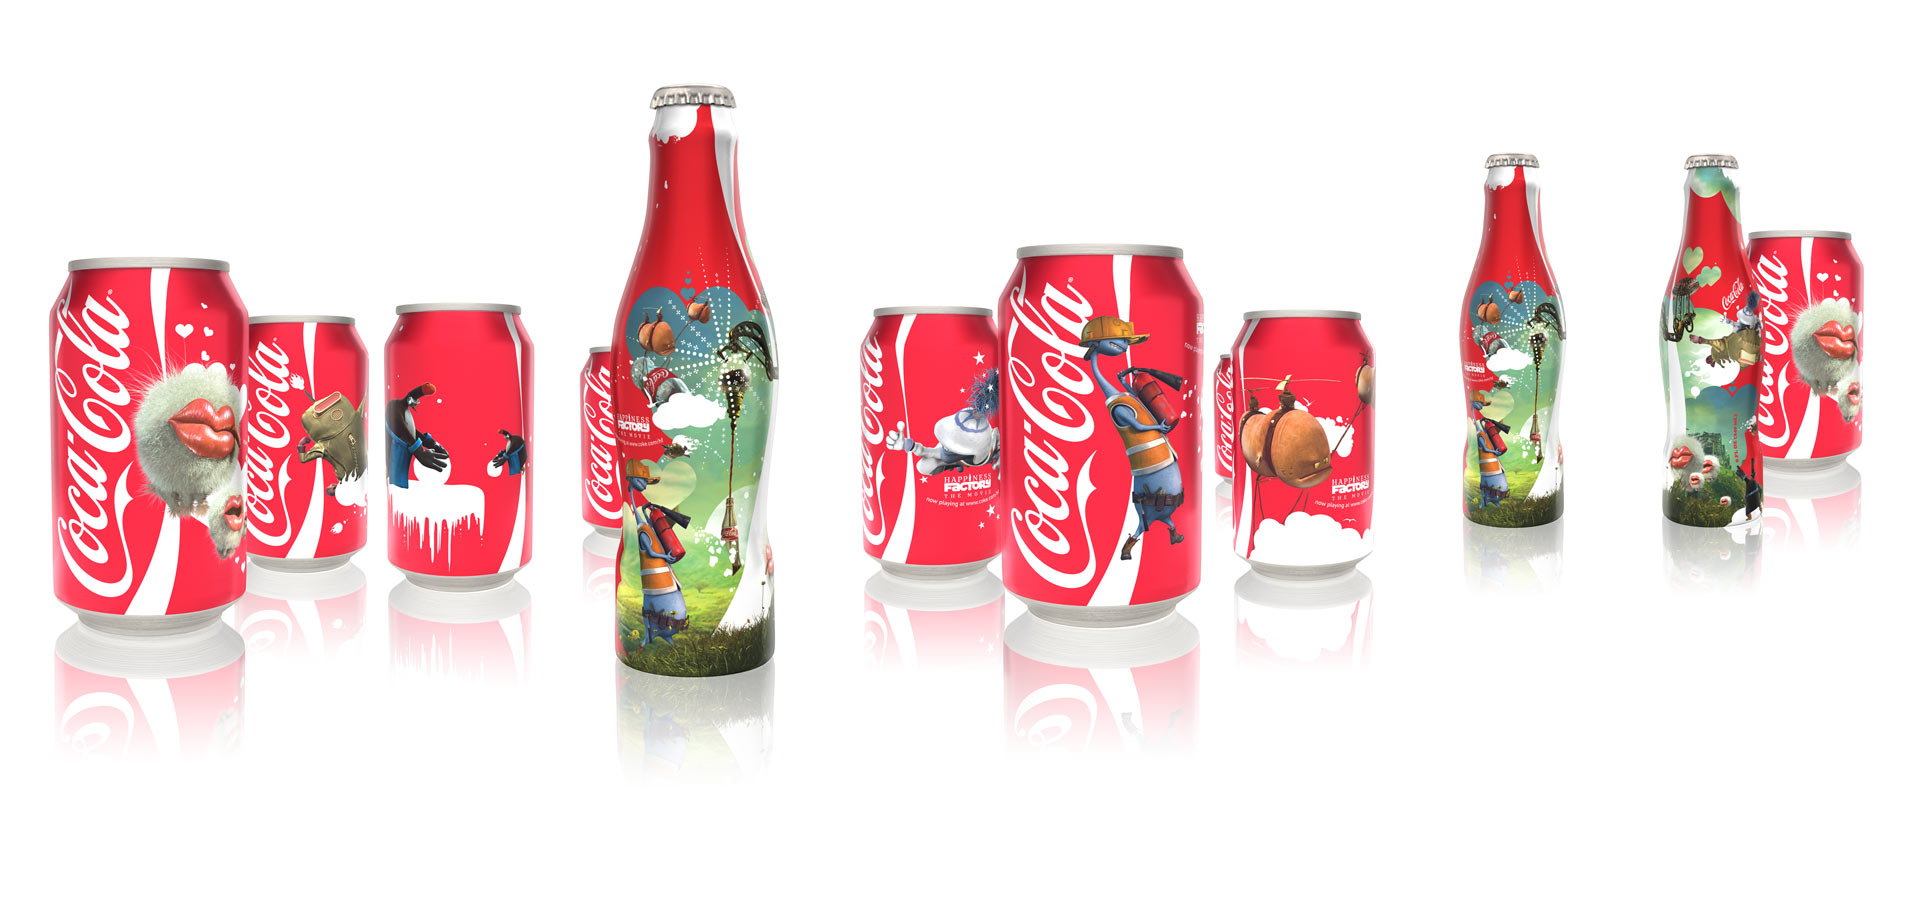 Coca-Cola Happiness Factory packaging